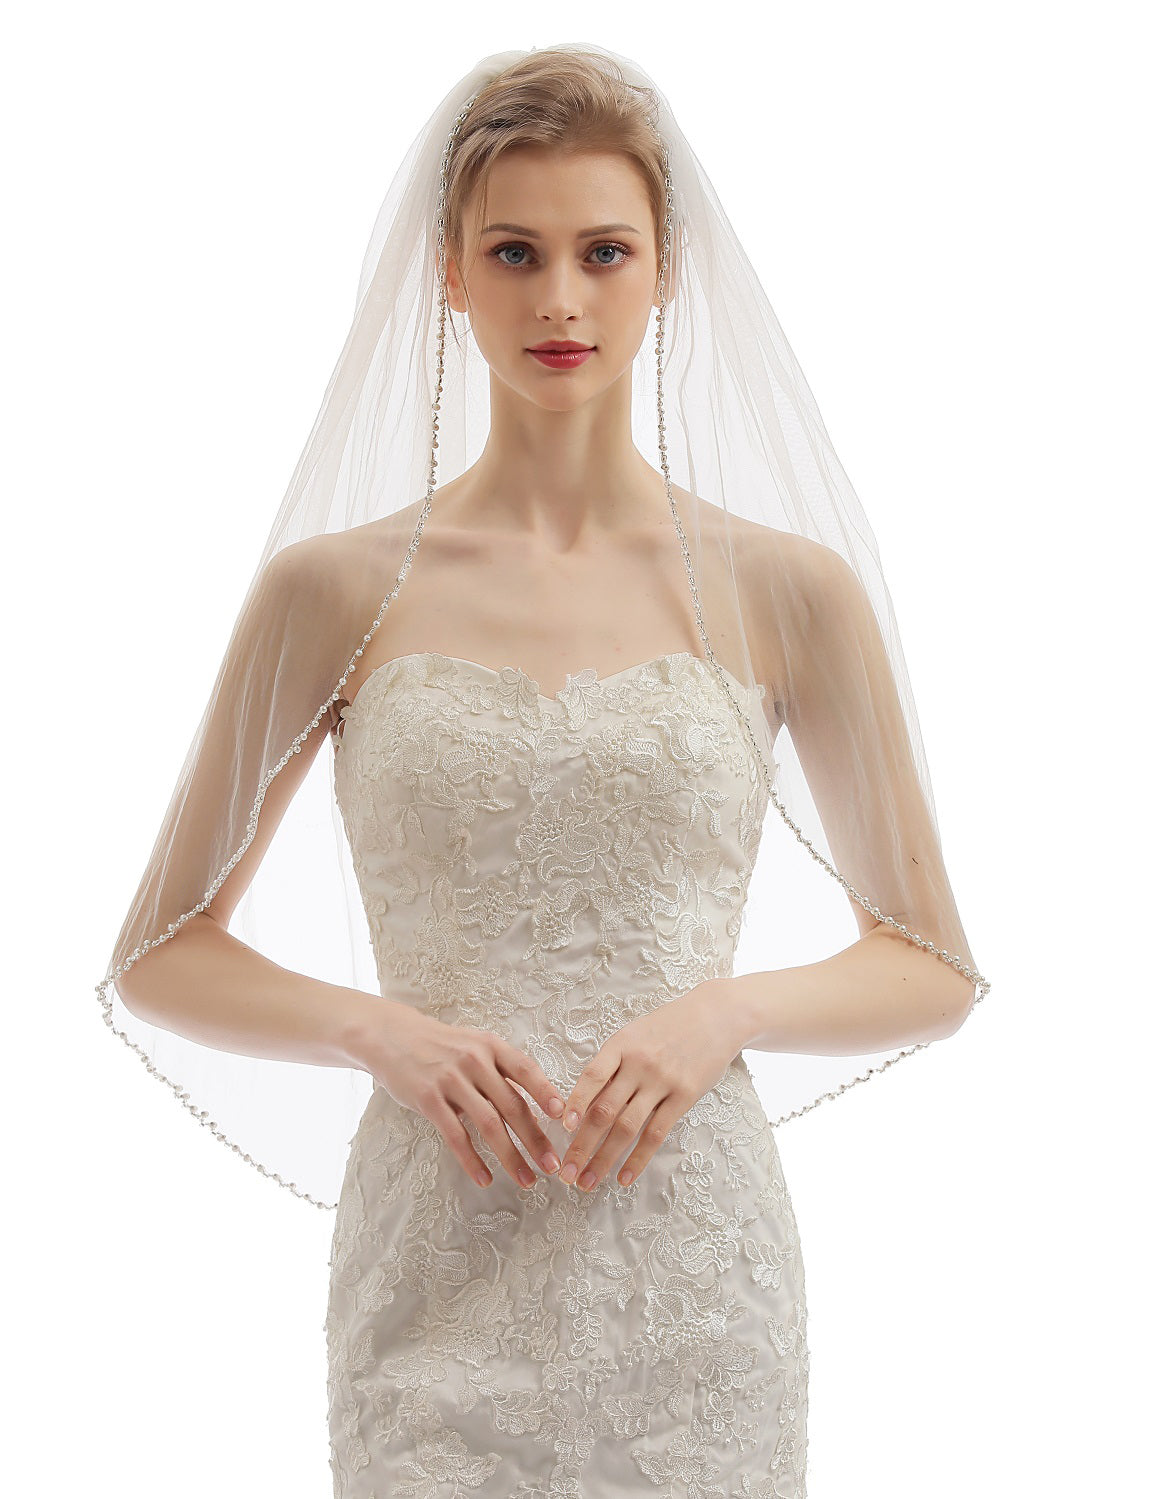 Bridal pearl veil white/ivory 90 cm veil 1 layer of luxurious soft tulle +  comb